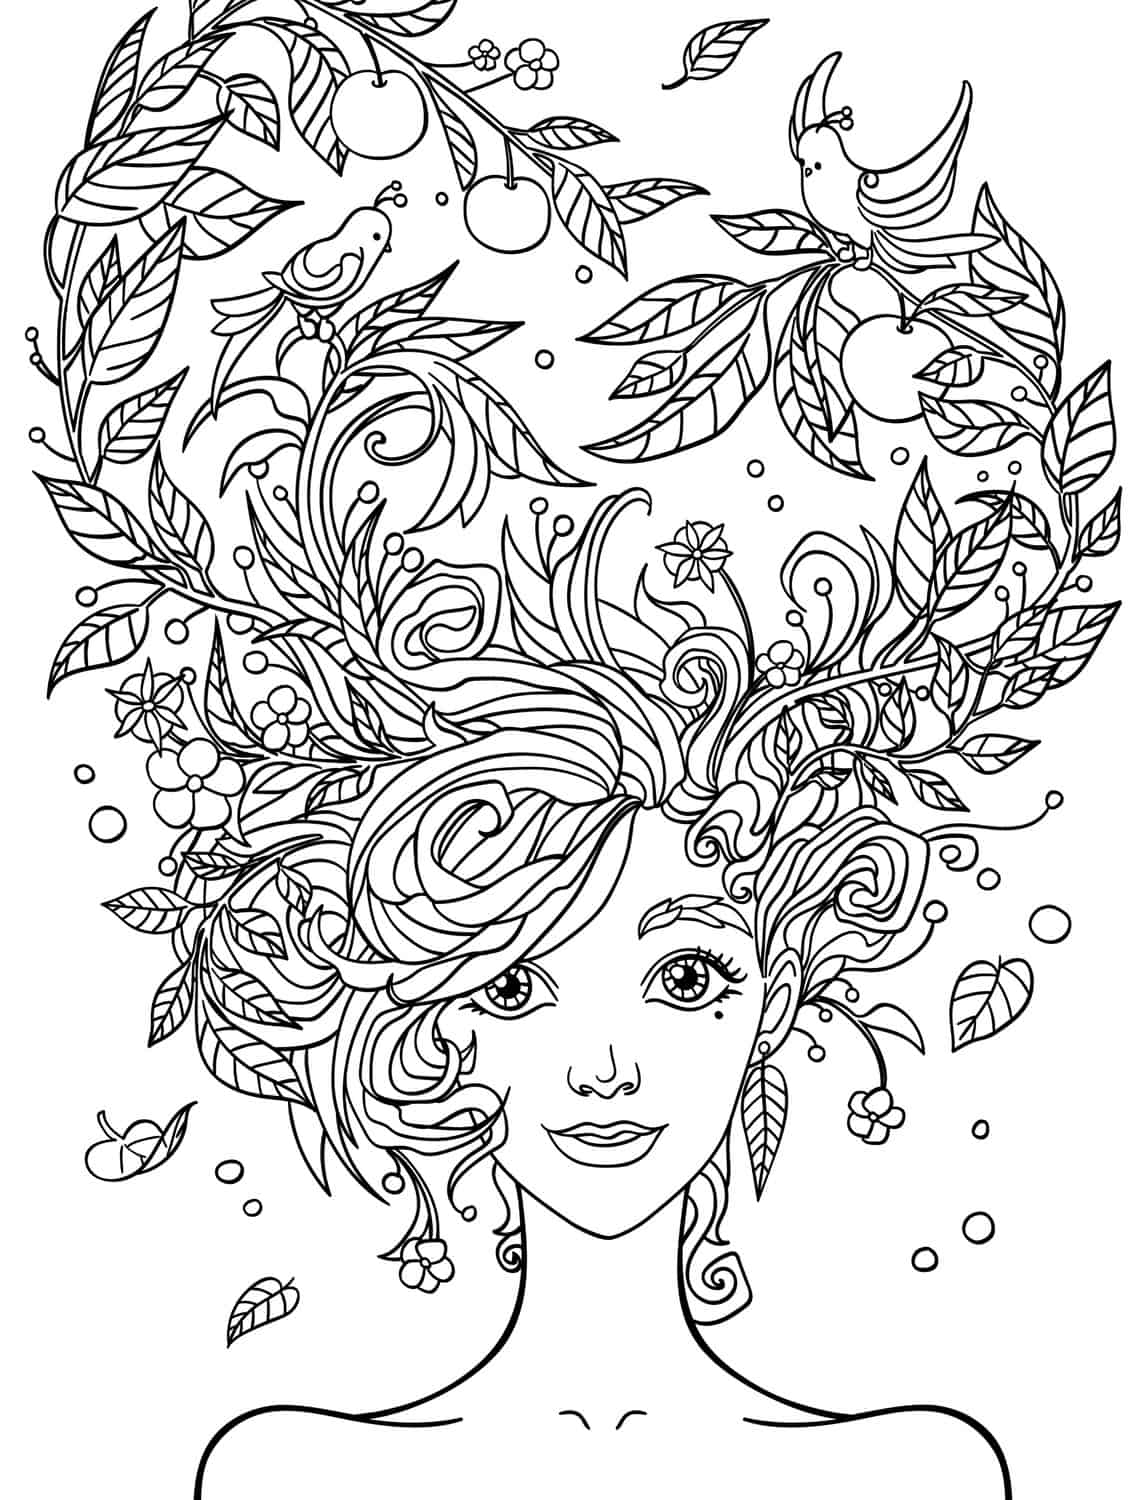 yellow hair after coloring pages for children - photo #33